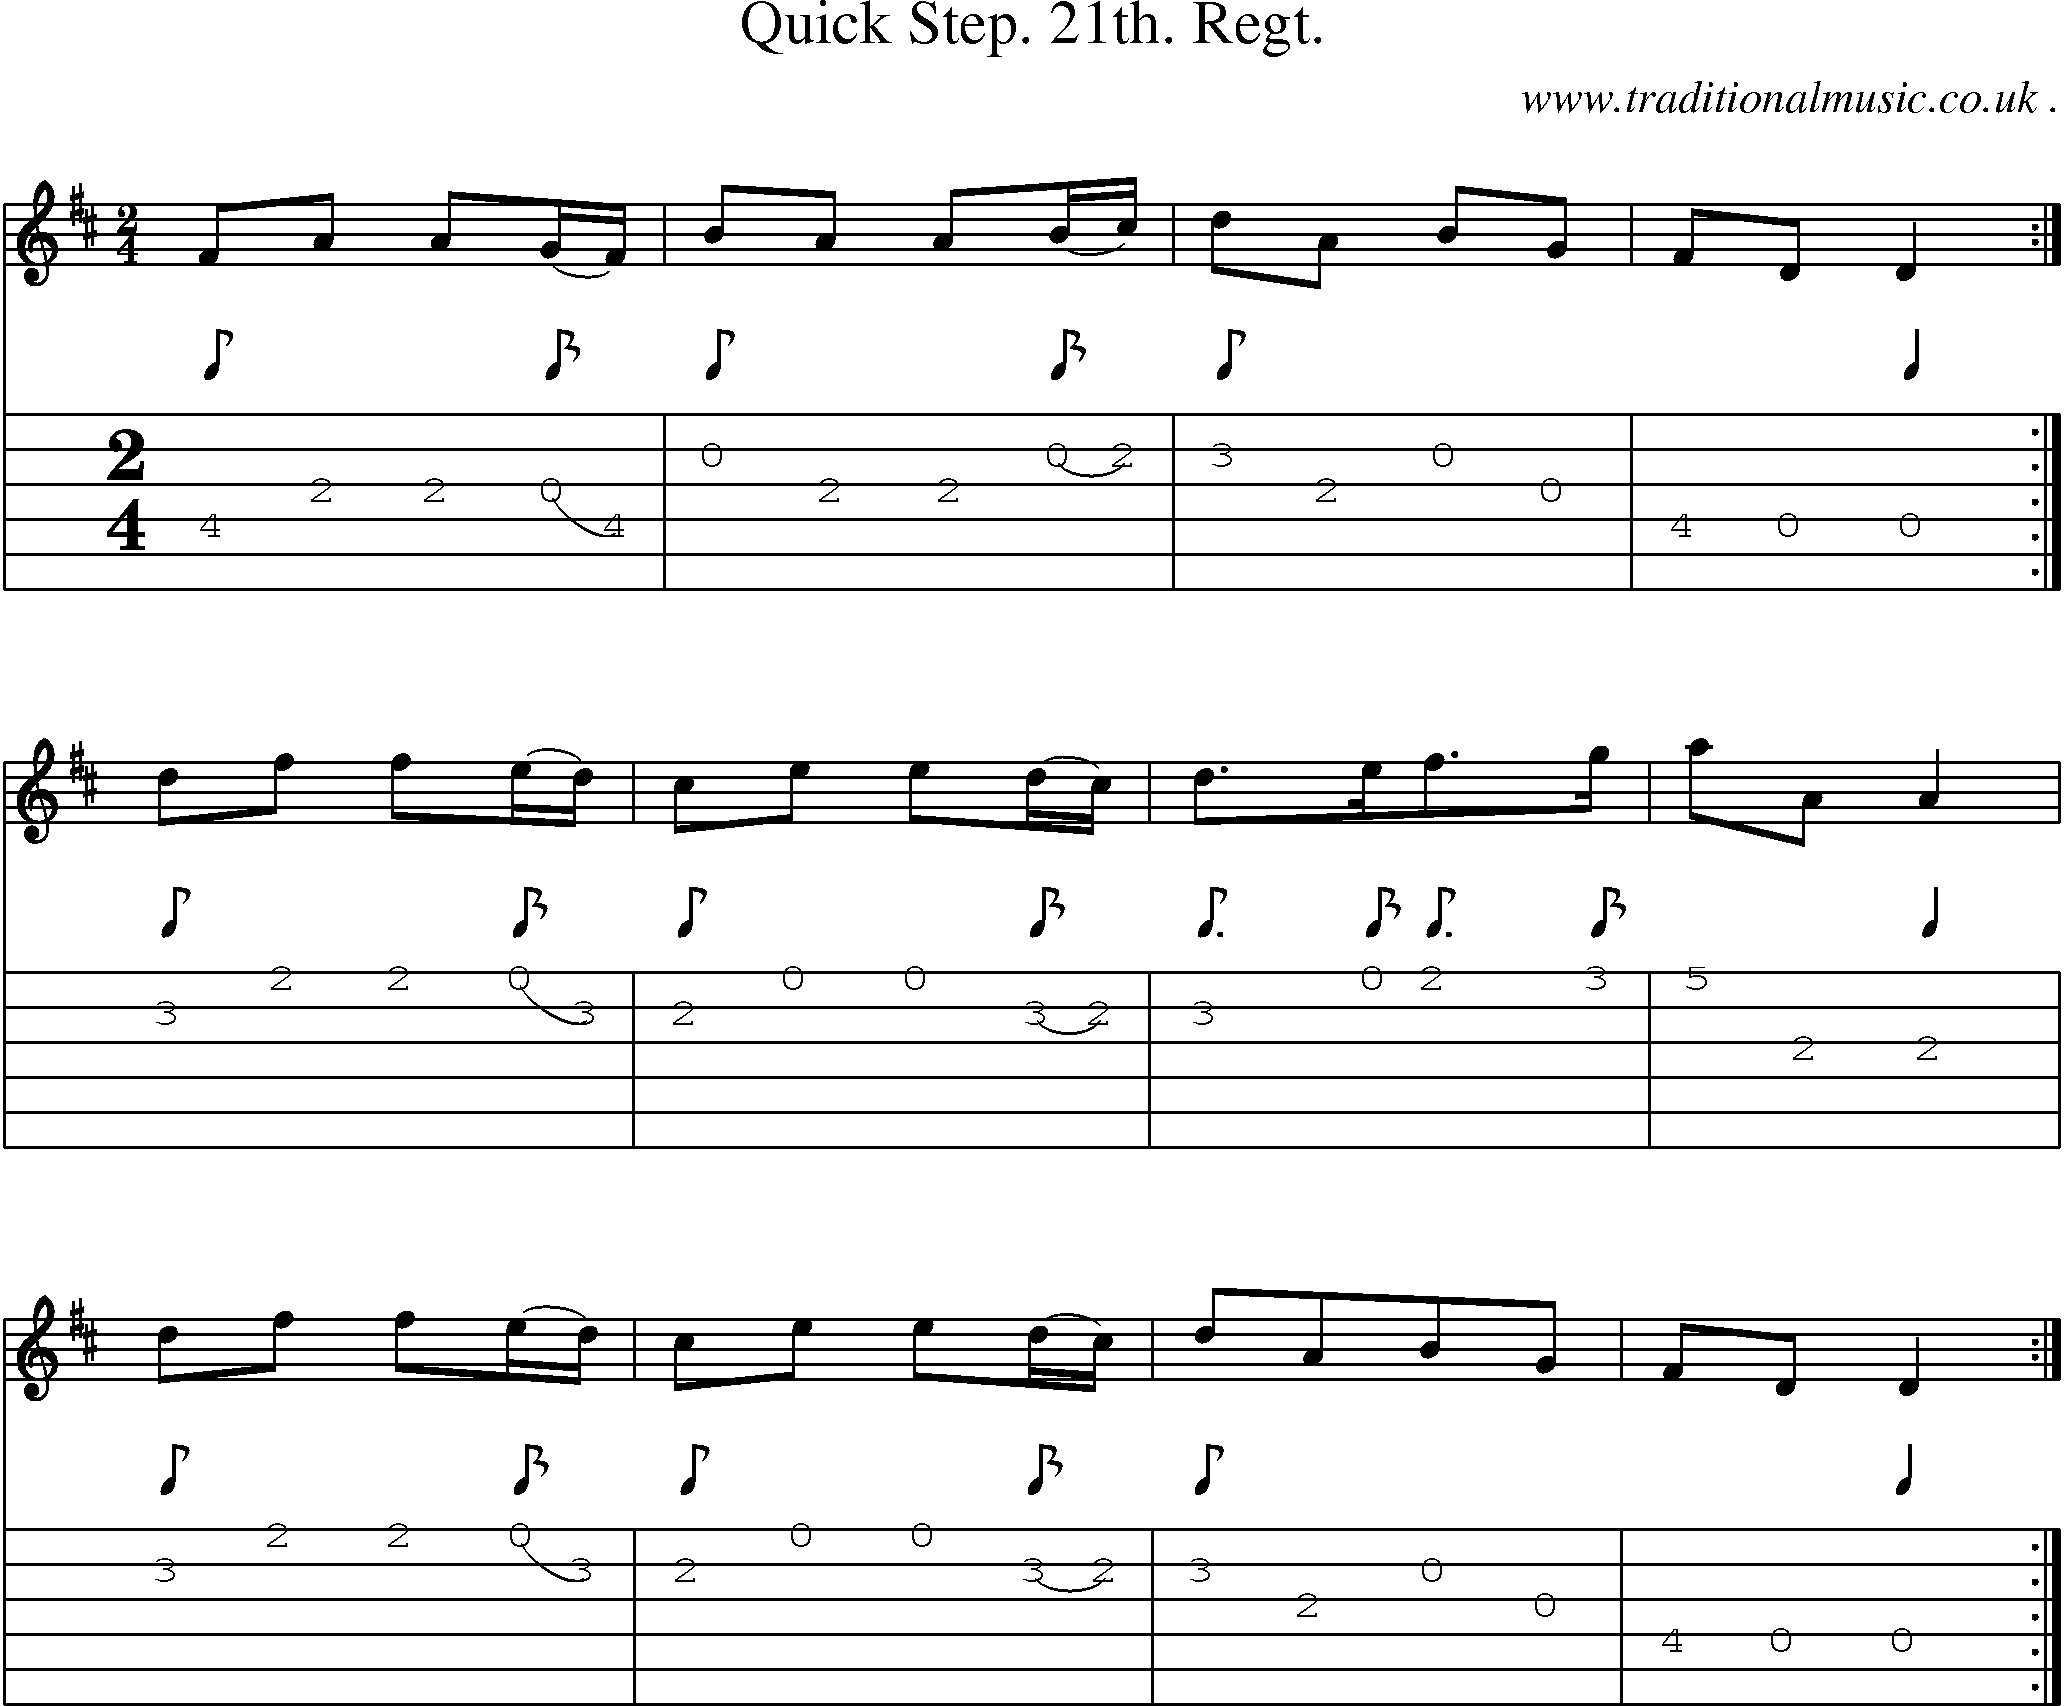 Sheet-music  score, Chords and Guitar Tabs for Quick Step 21th Regt